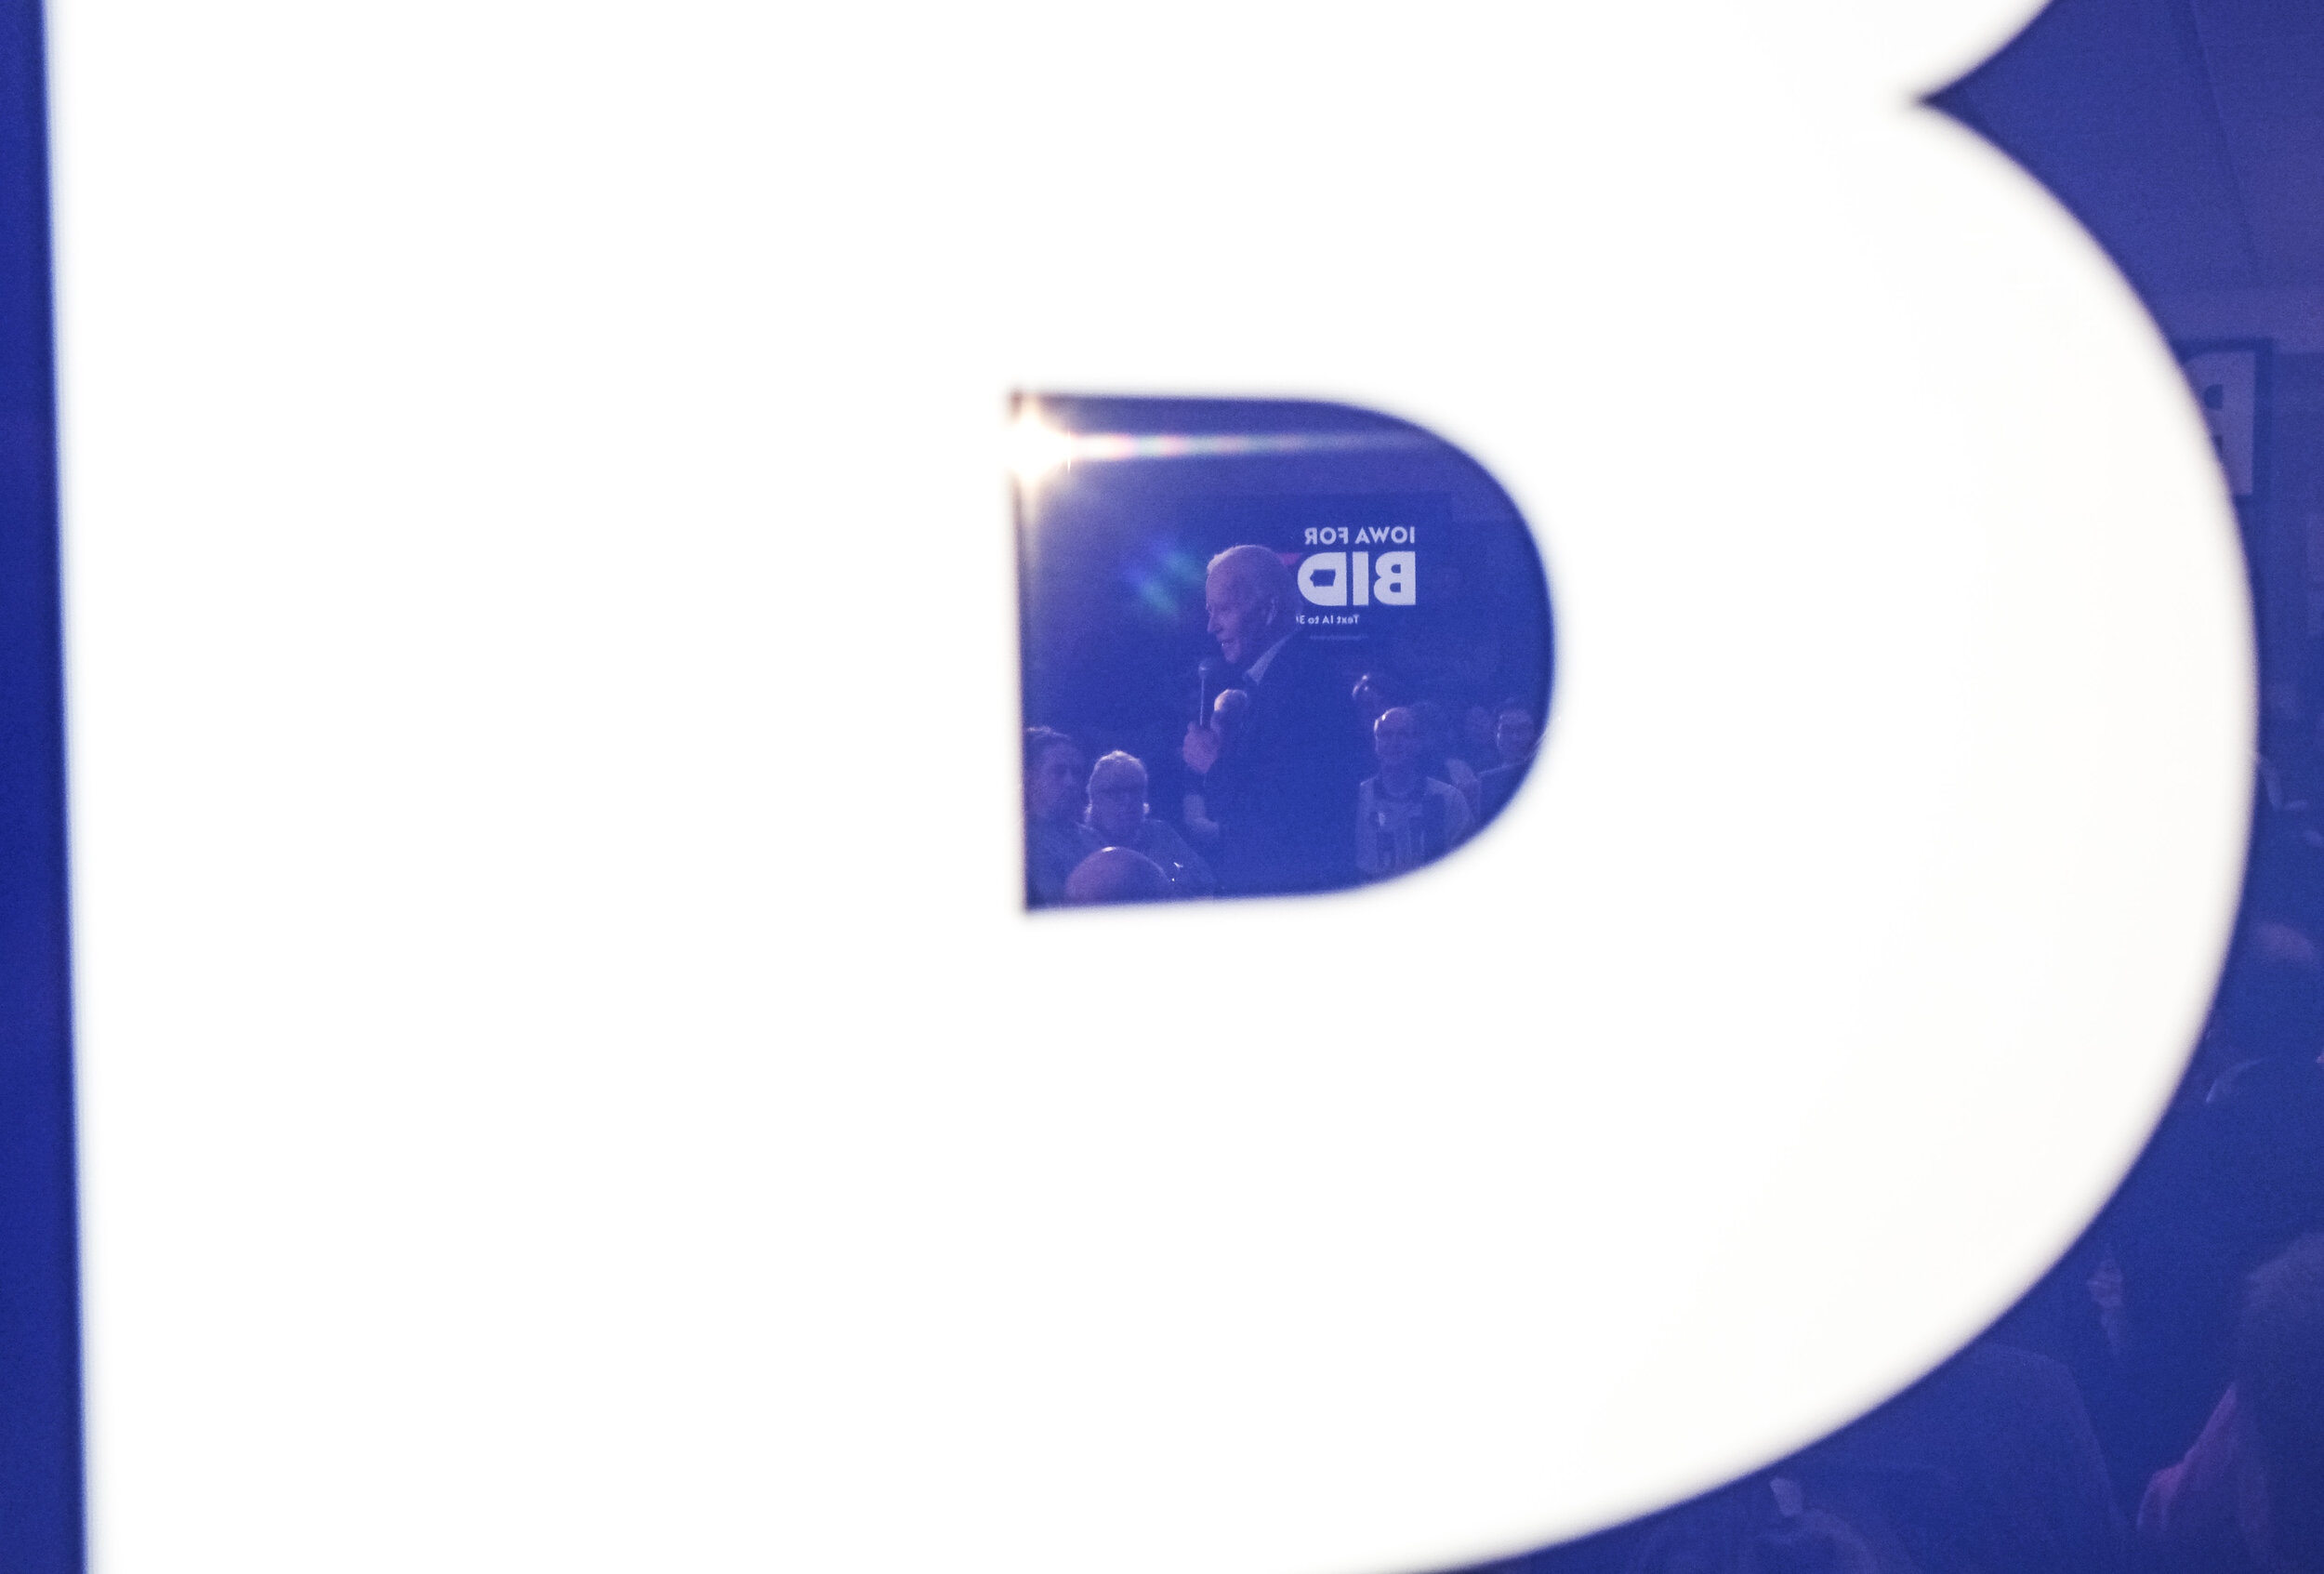  Joe Biden, the former Vice President and Democratic candidate, is reflected in a campaign sign as he delivers a speech to a small group of supporters in Fort Madison, Iowa on February 1, 2020. 